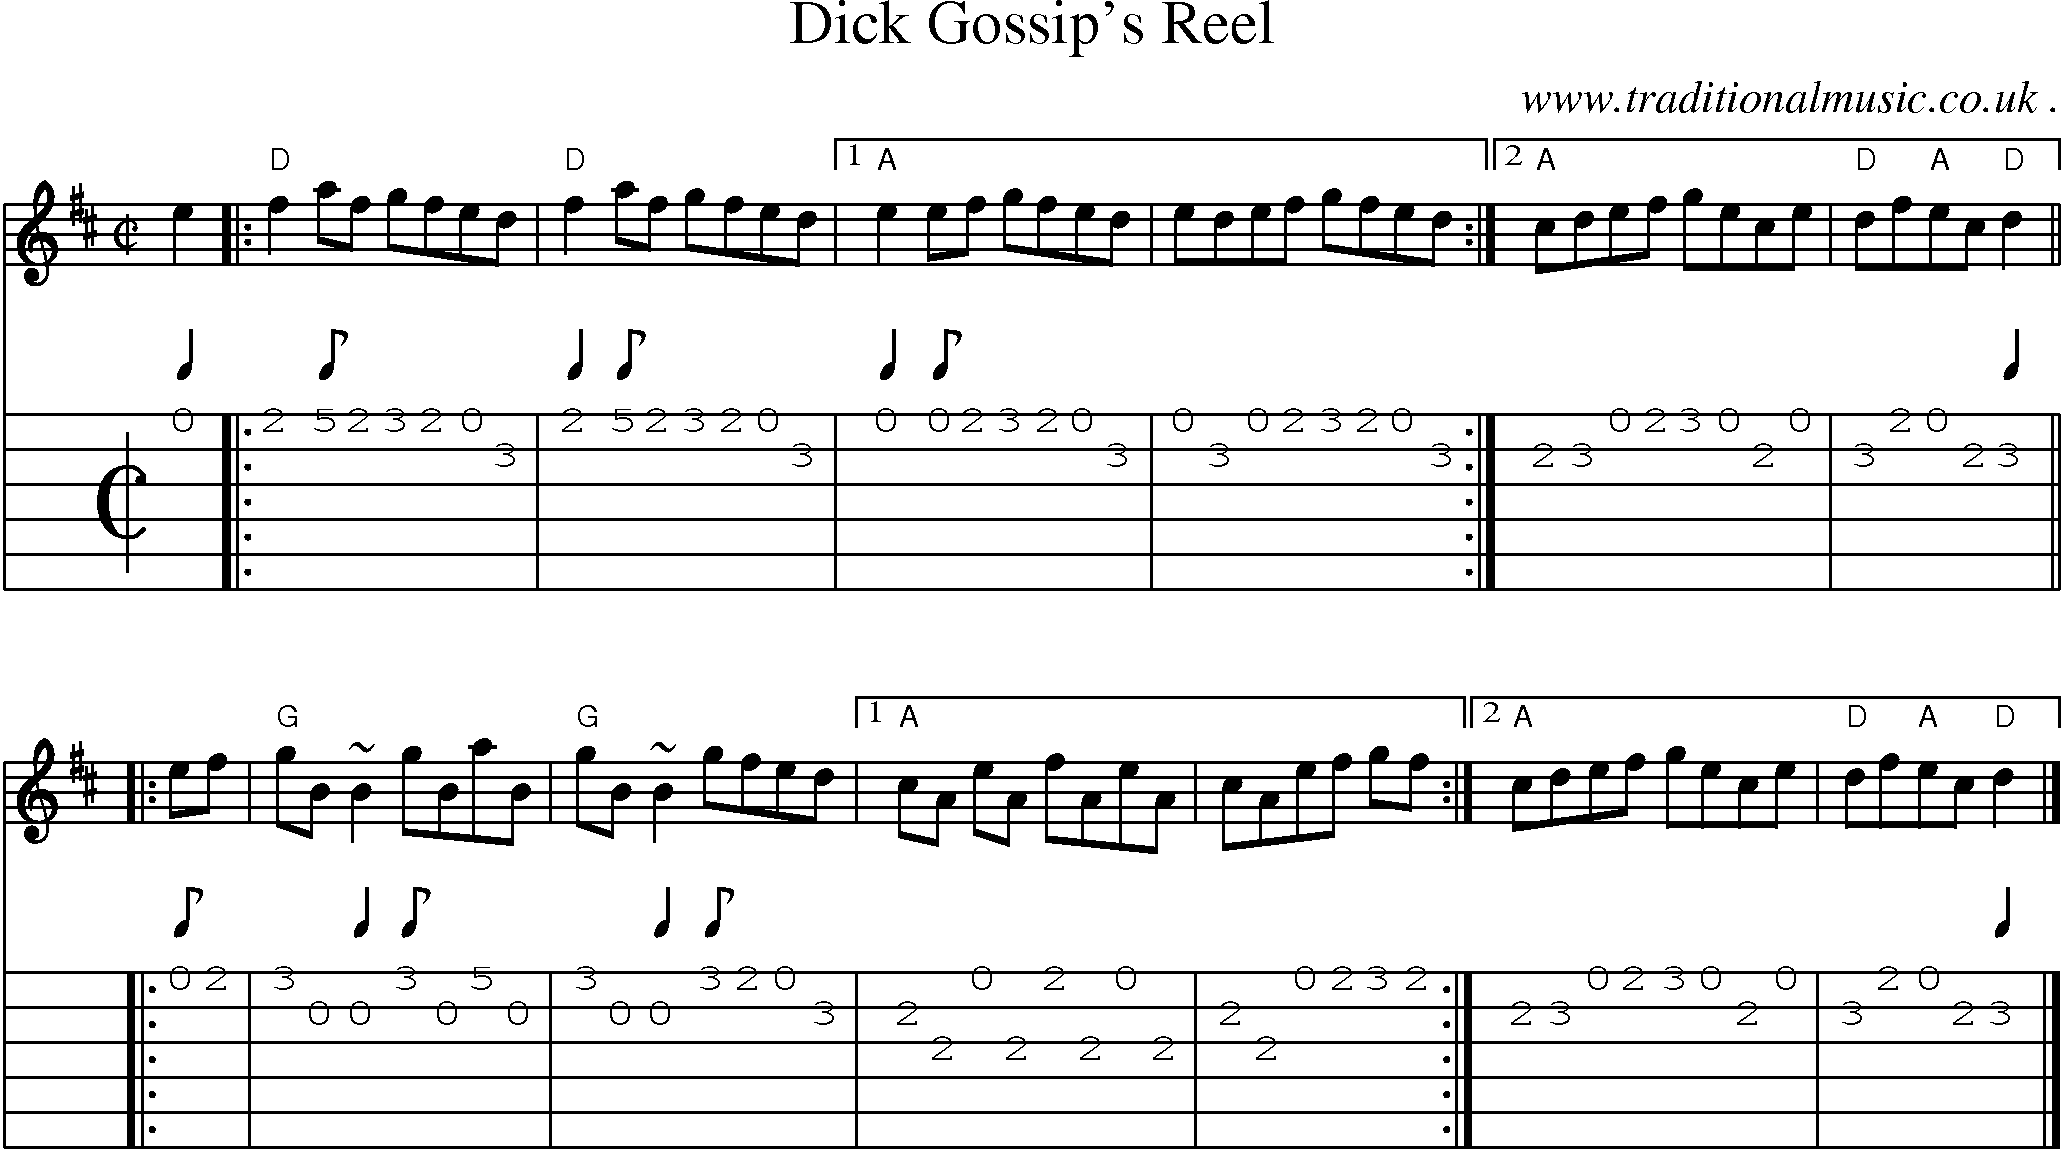 Sheet-music  score, Chords and Guitar Tabs for Dick Gossips Reel